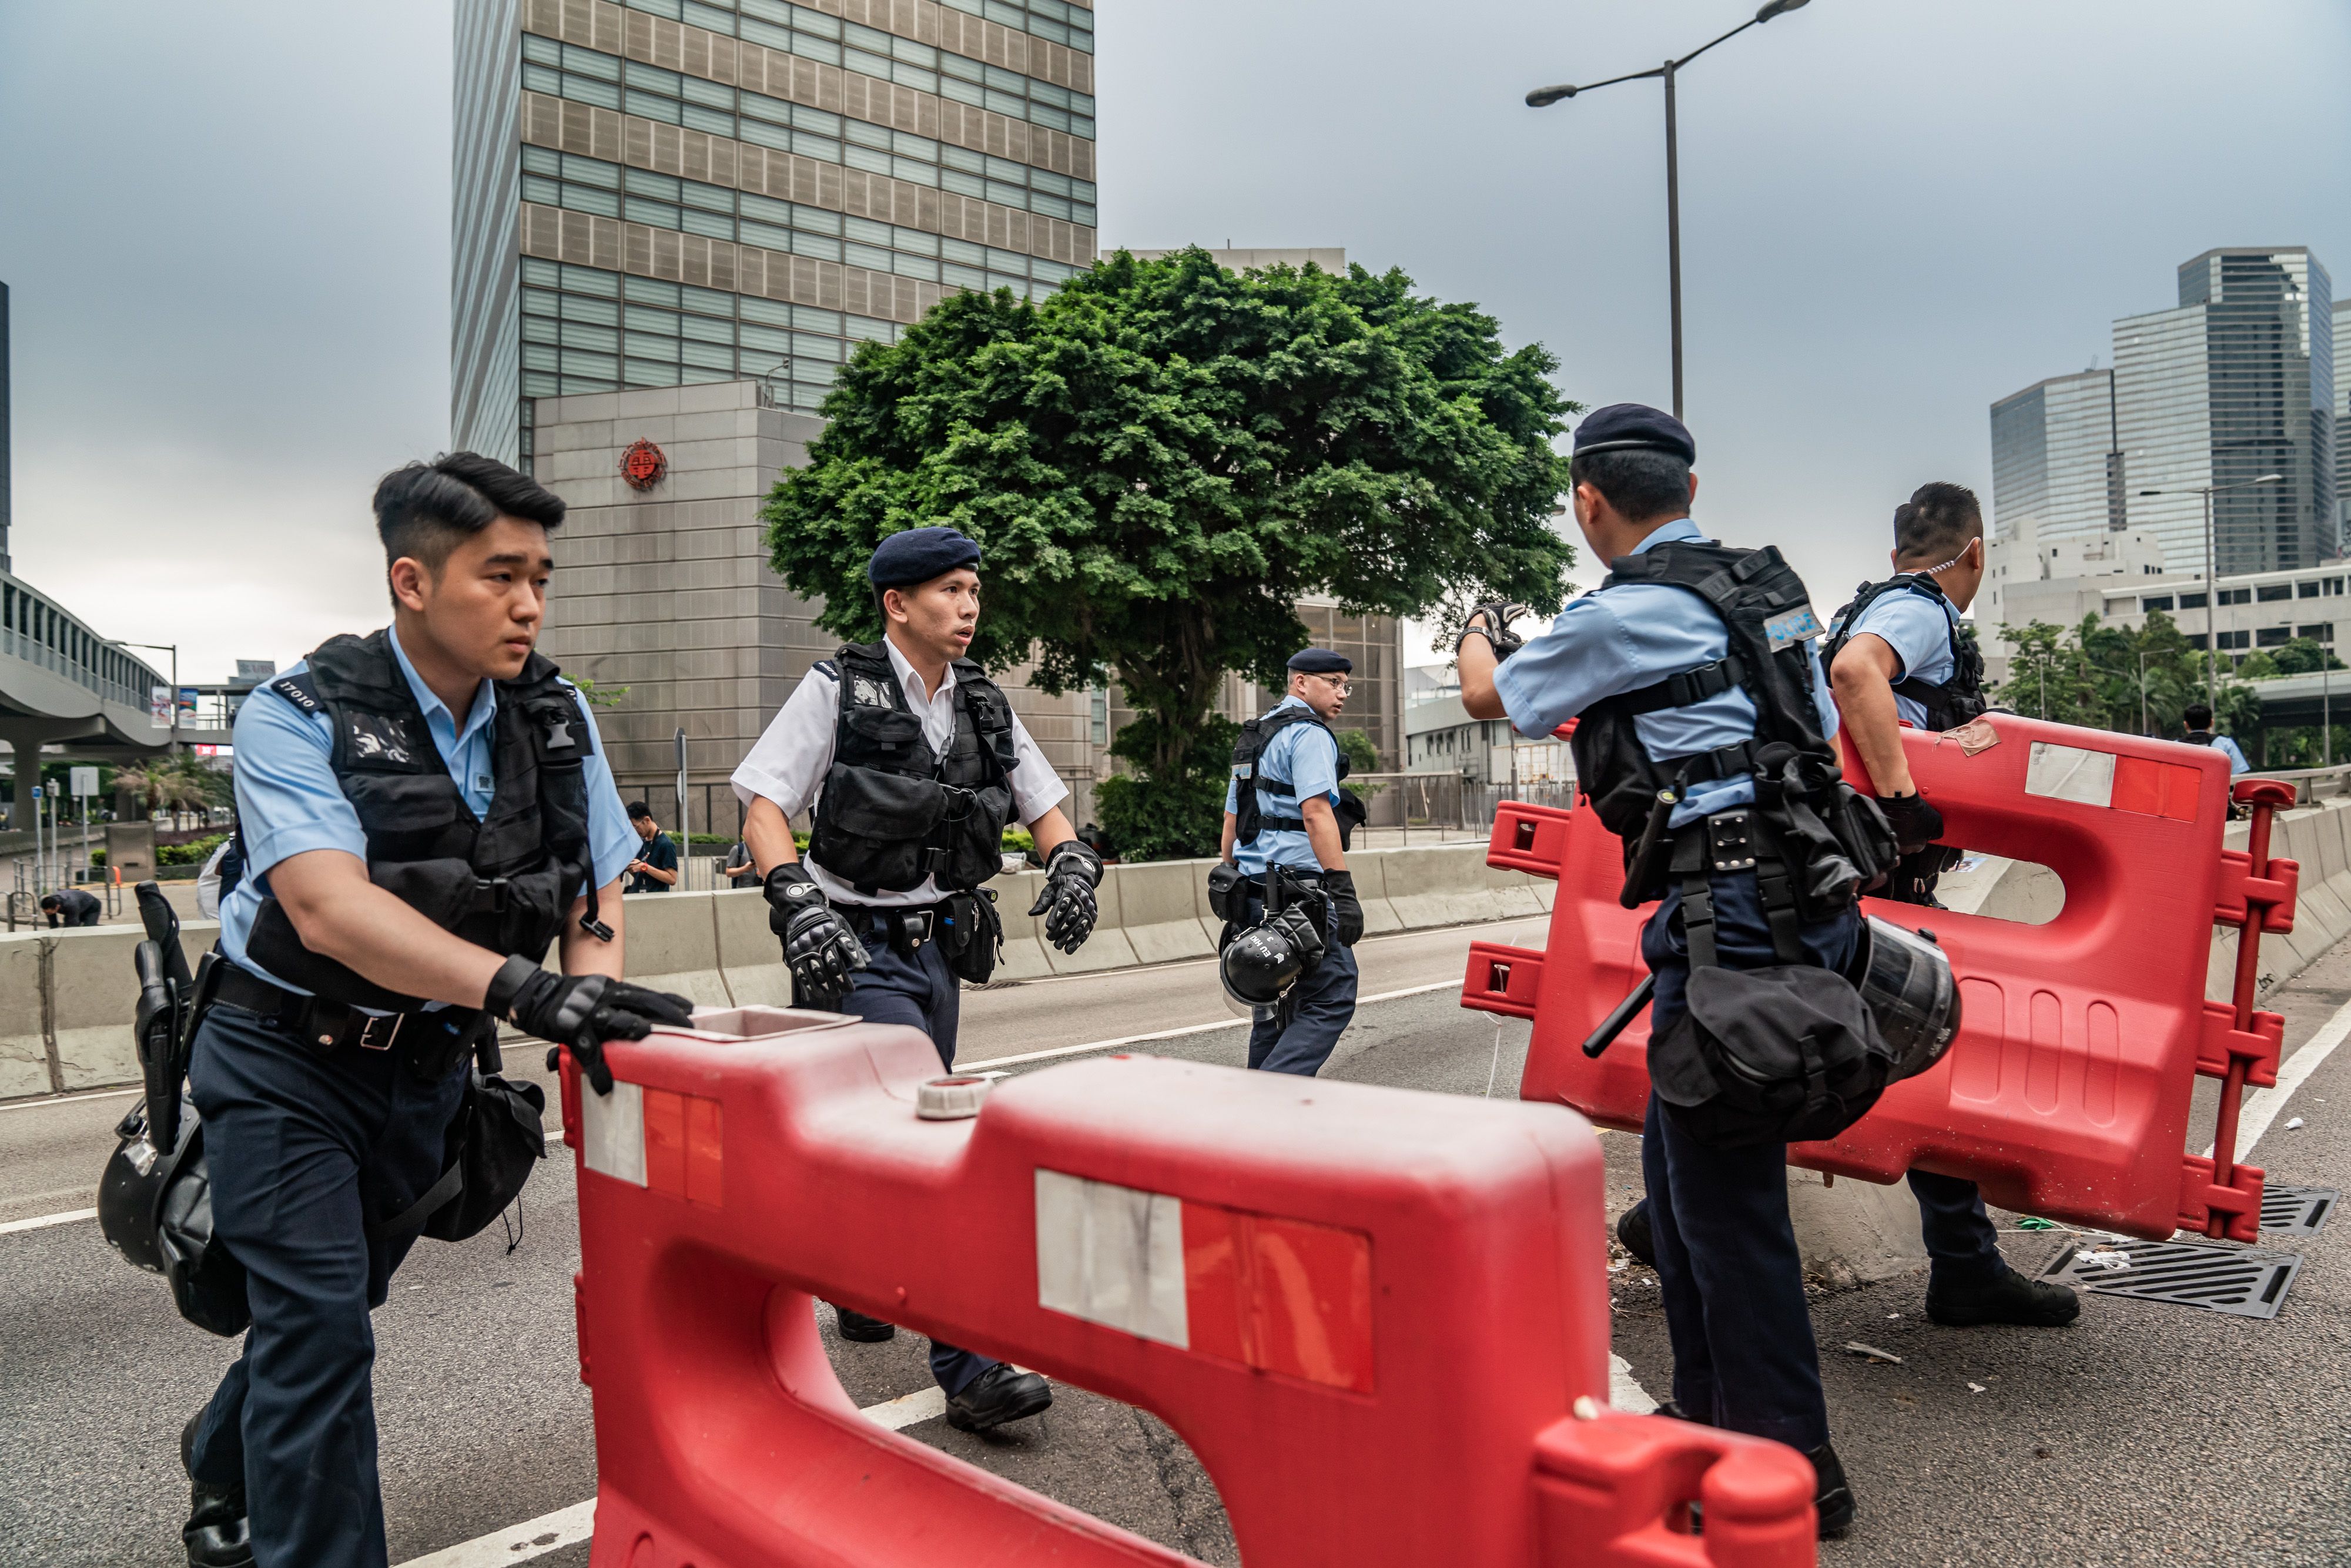  Police officers clear barricades as they attempt to clear the road after a demonstration against the now-suspended extradition bill on June 17, 2019 in Hong Kong.